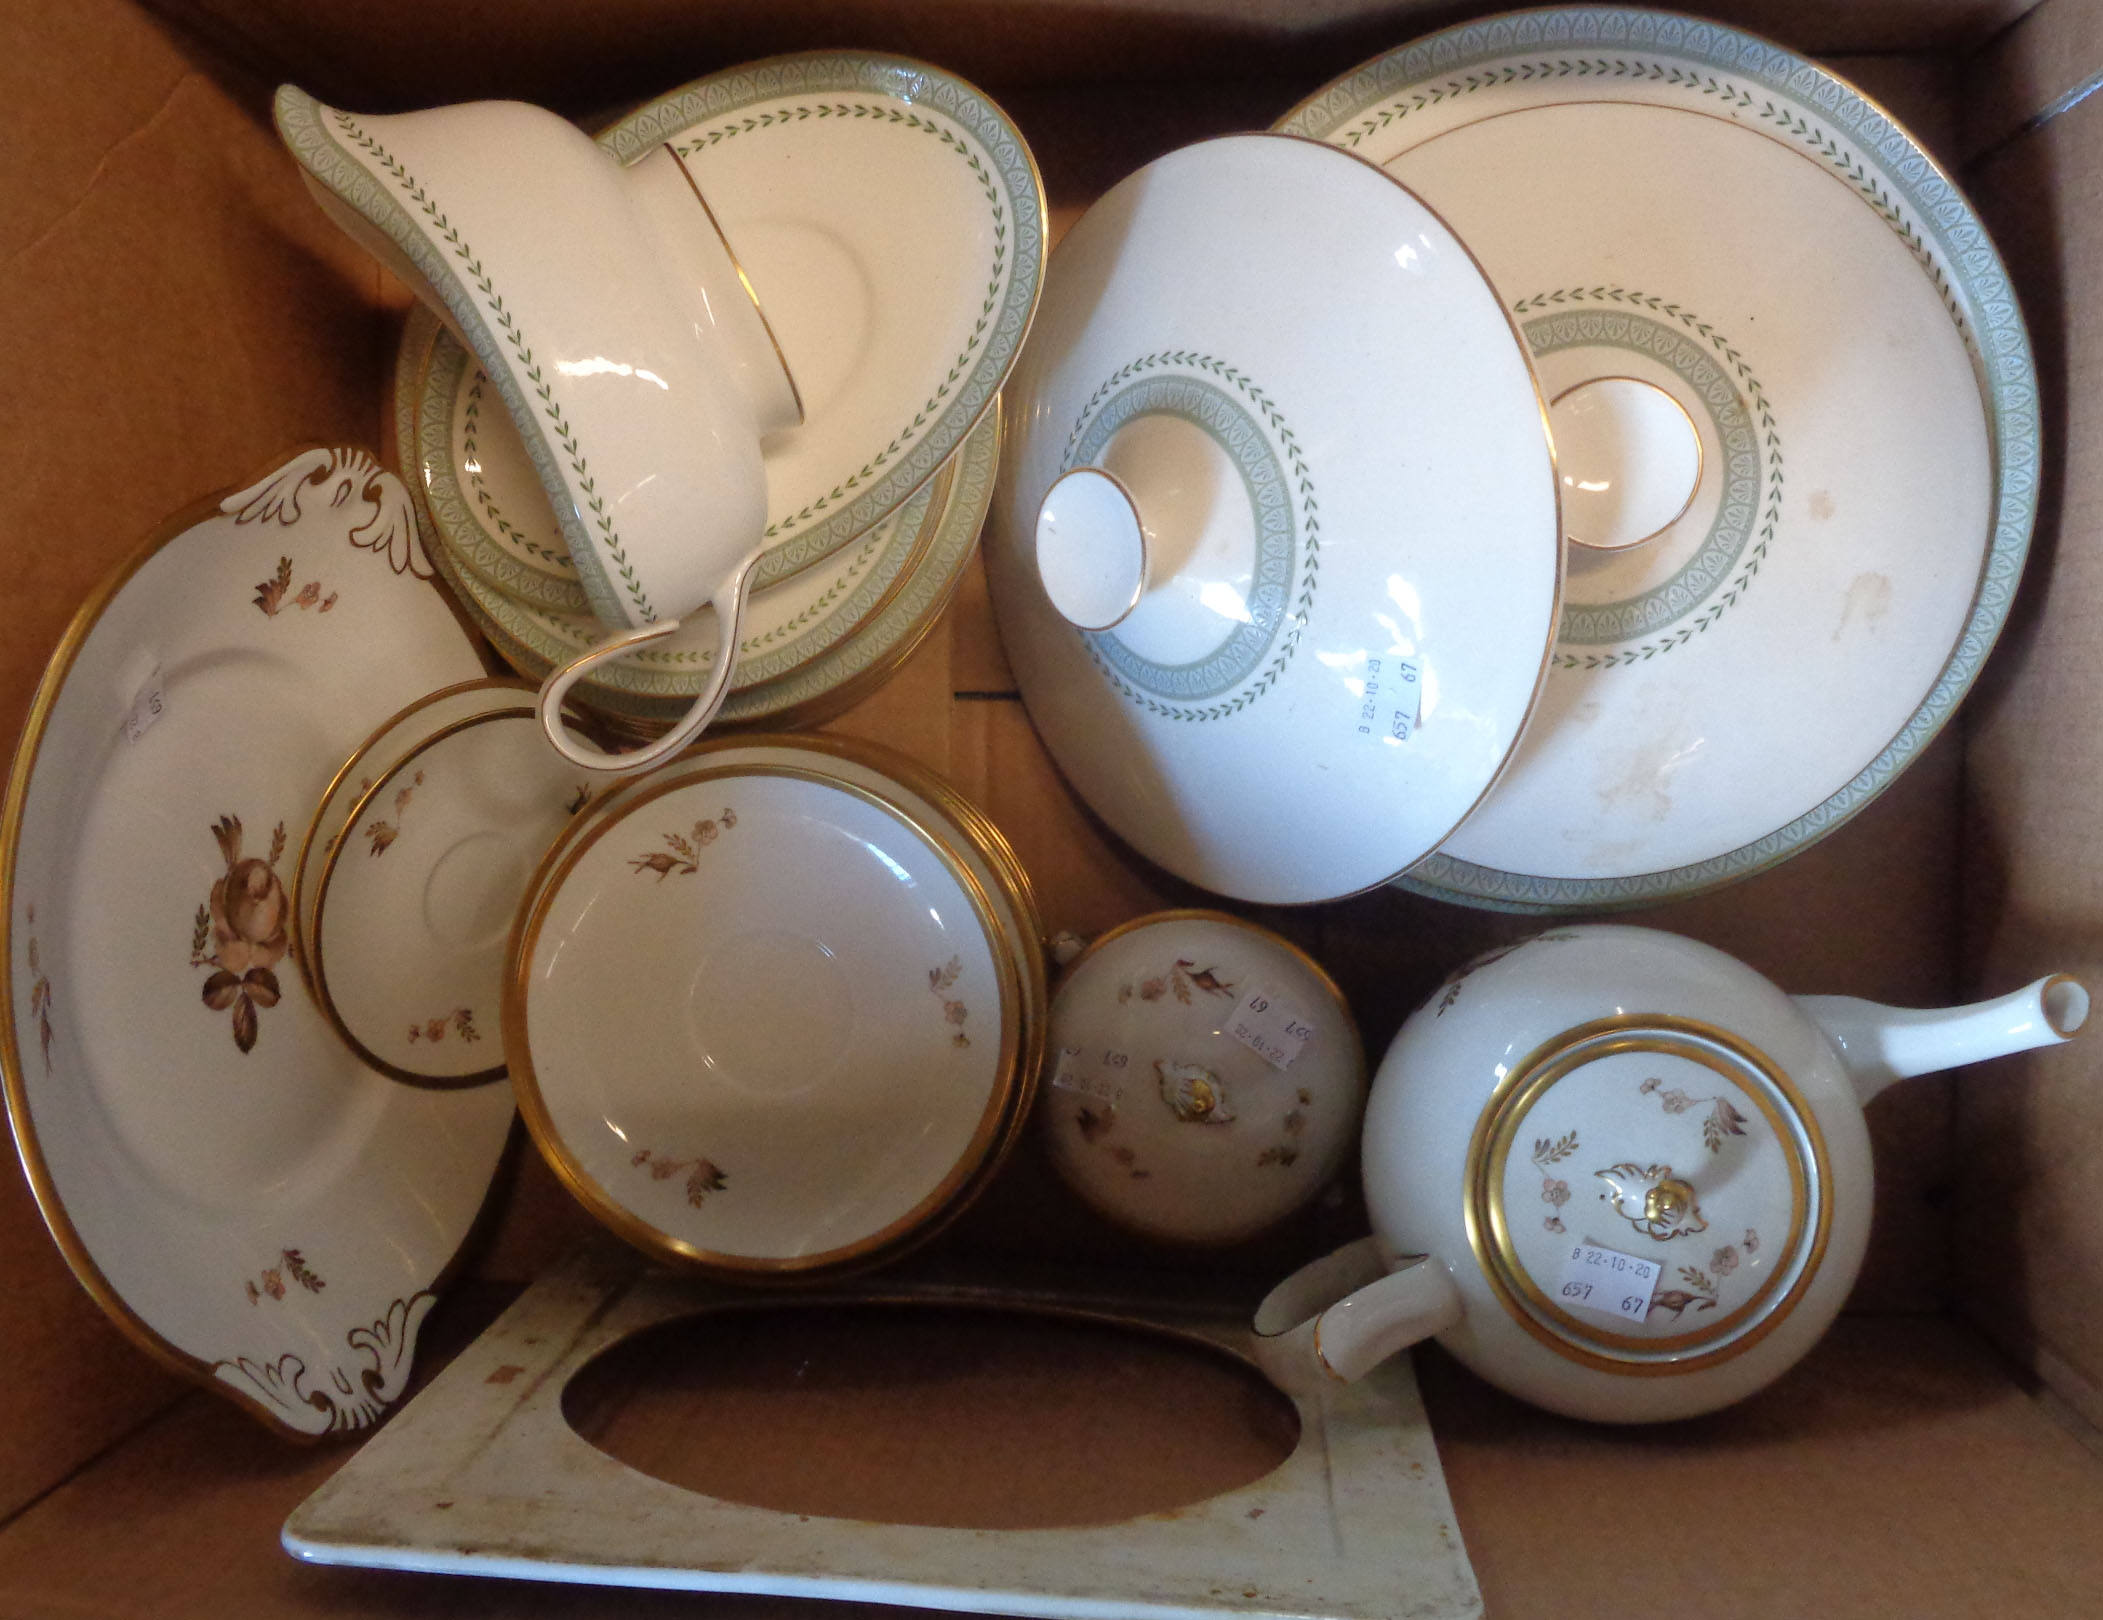 A small quantity of Royal Doulton Berkshire dinner ware, and Royal Copenhagen porcelain teaware